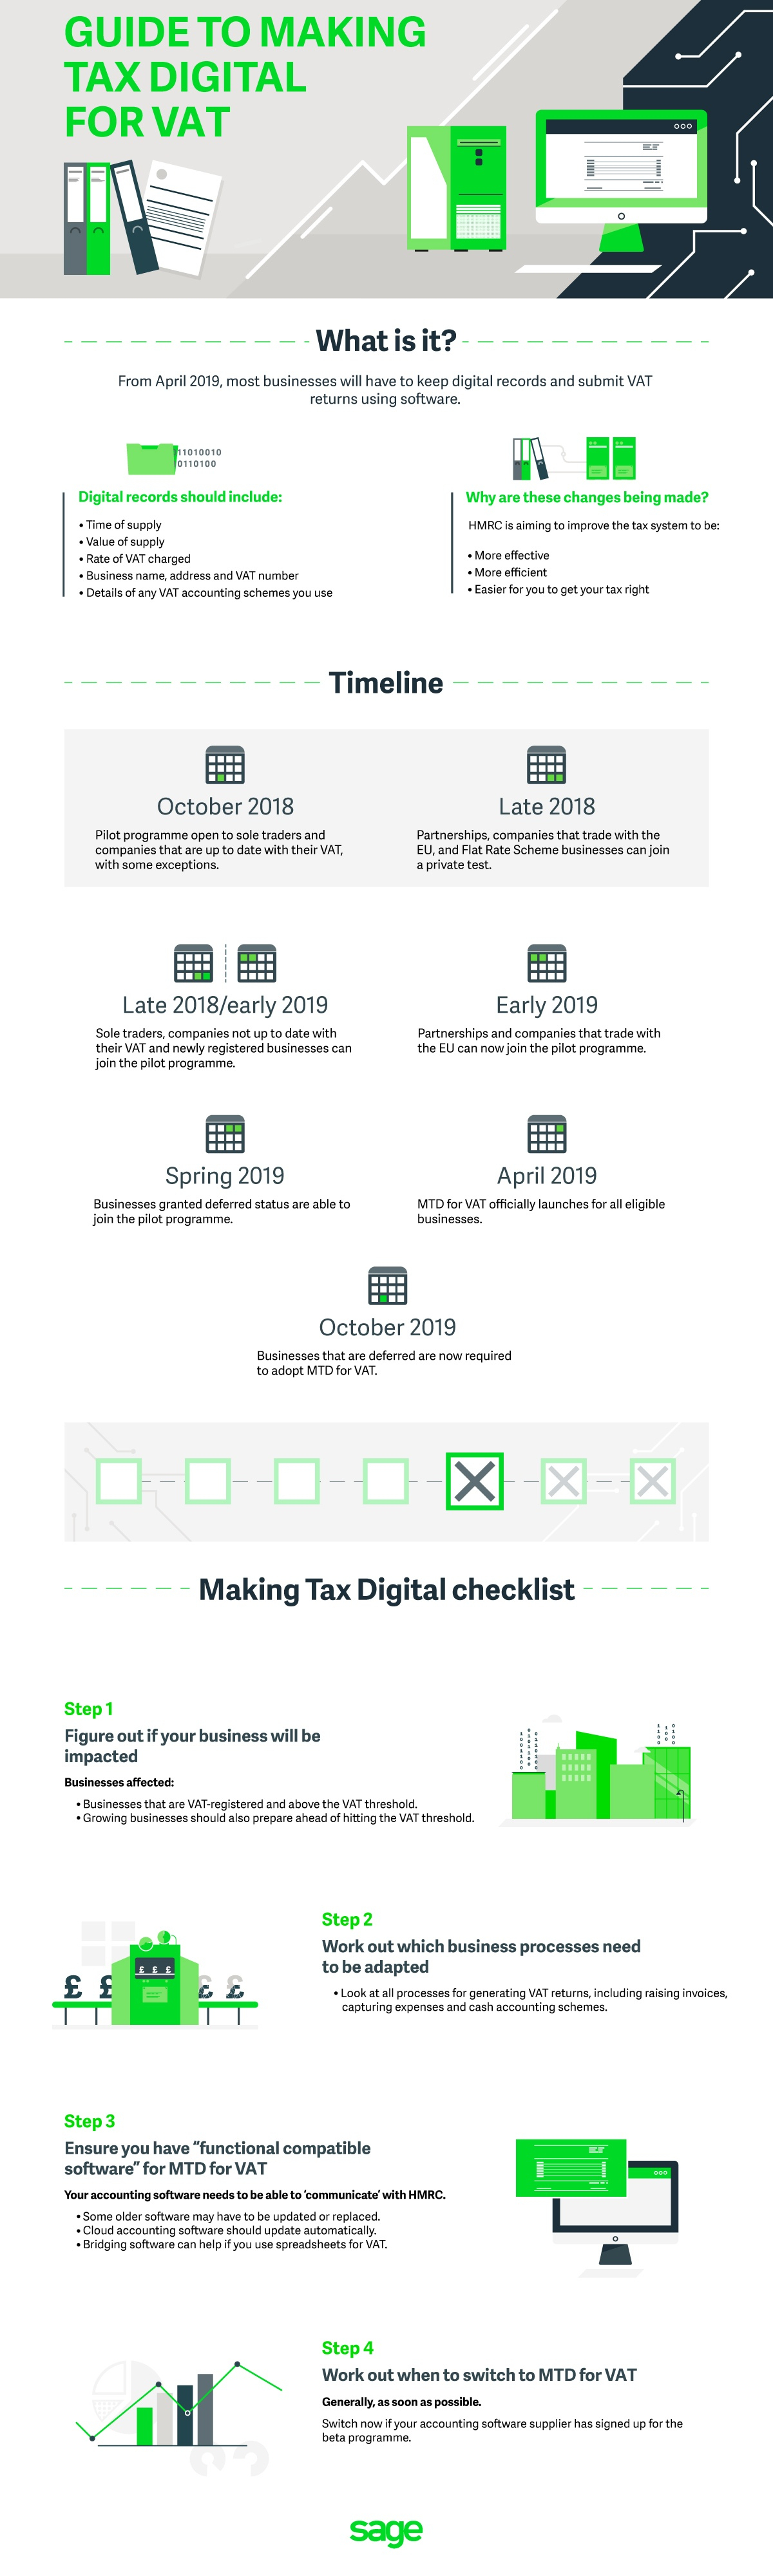 Partial Exemption Calculation Spreadsheet Throughout Making Tax Digital For Vat: What Do Hmrc's Updates Mean For You